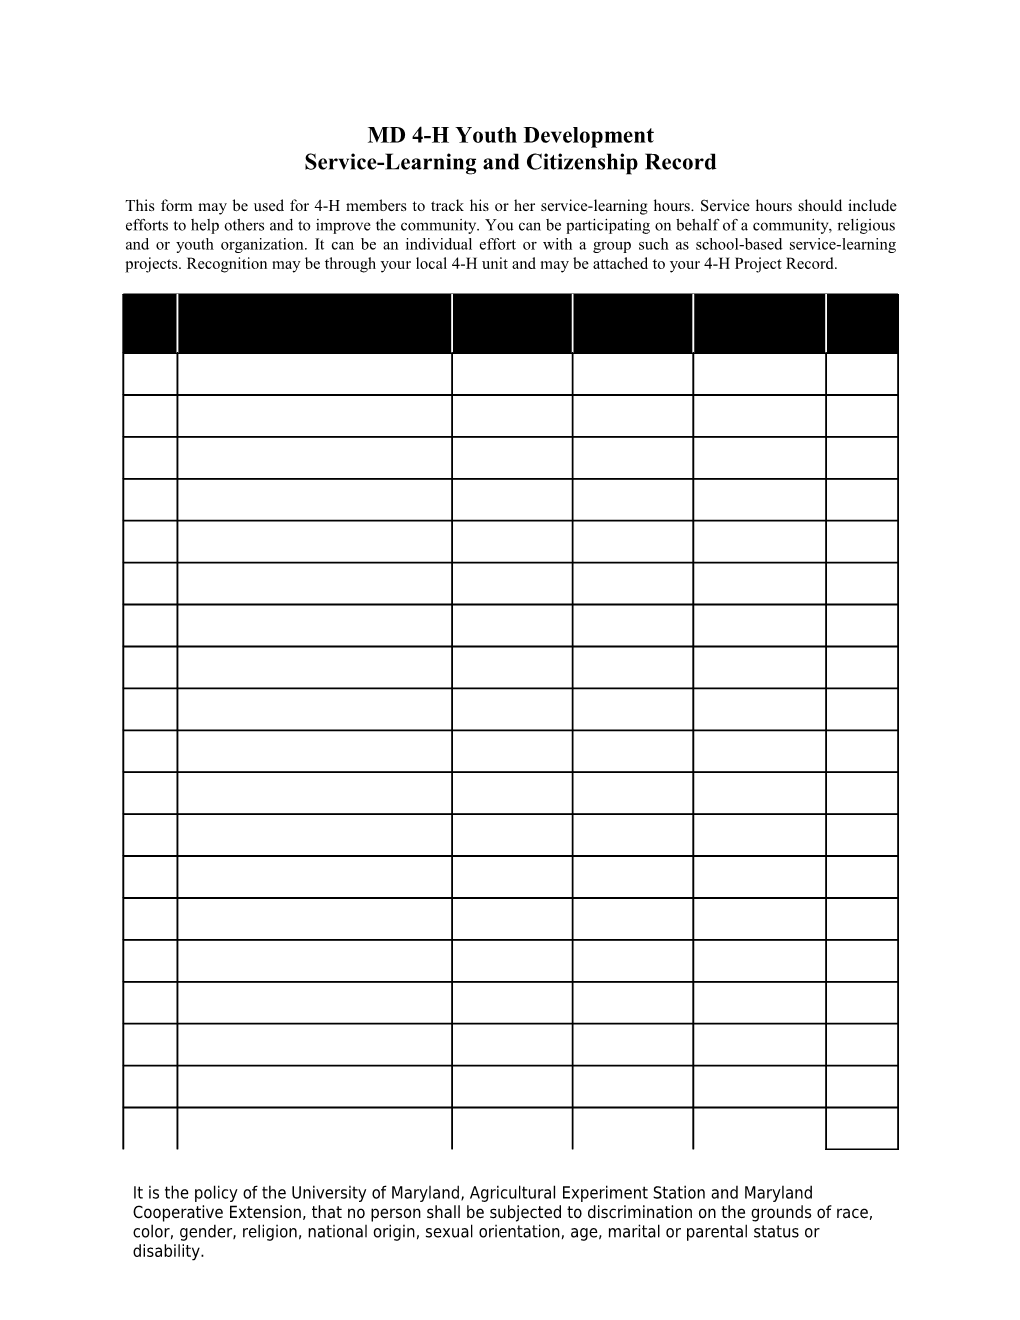 Service-Learning and Citizenship Record